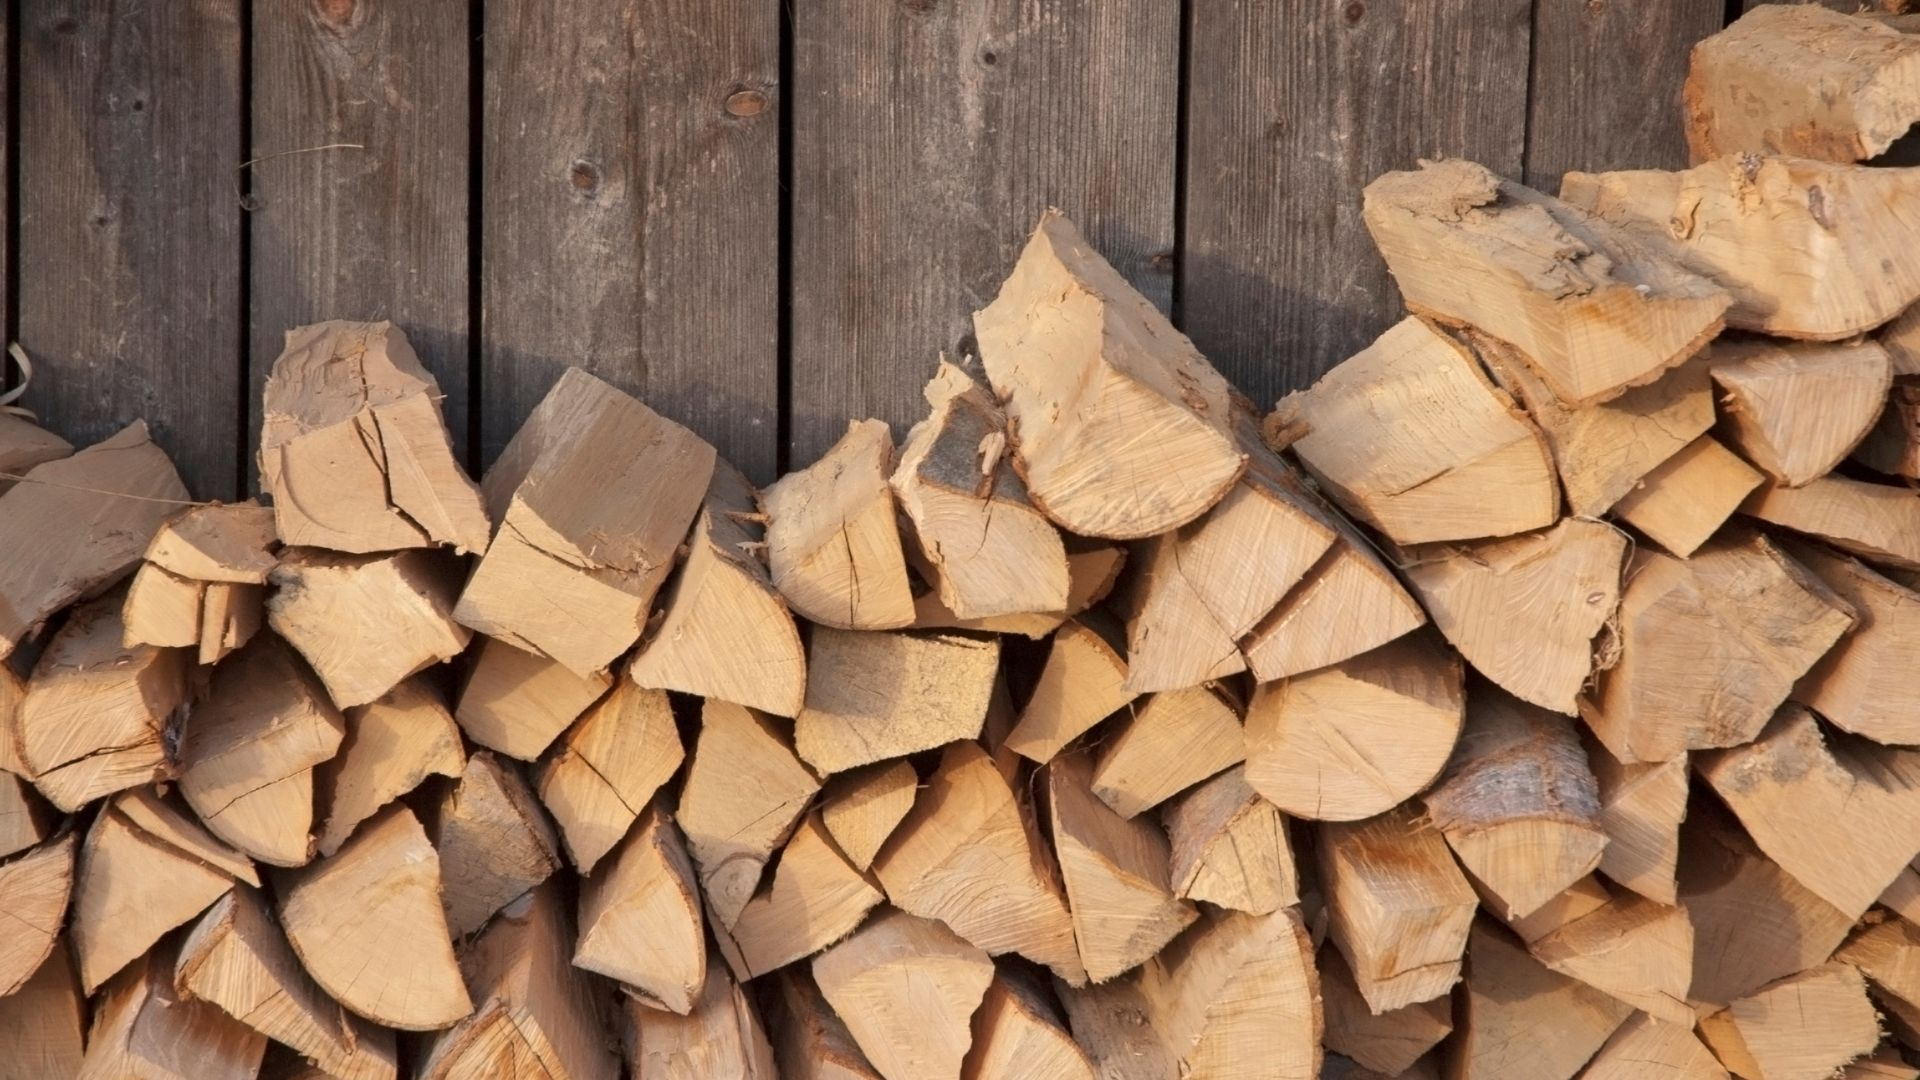 An image of cut firewood stacked alongside a wooden home.